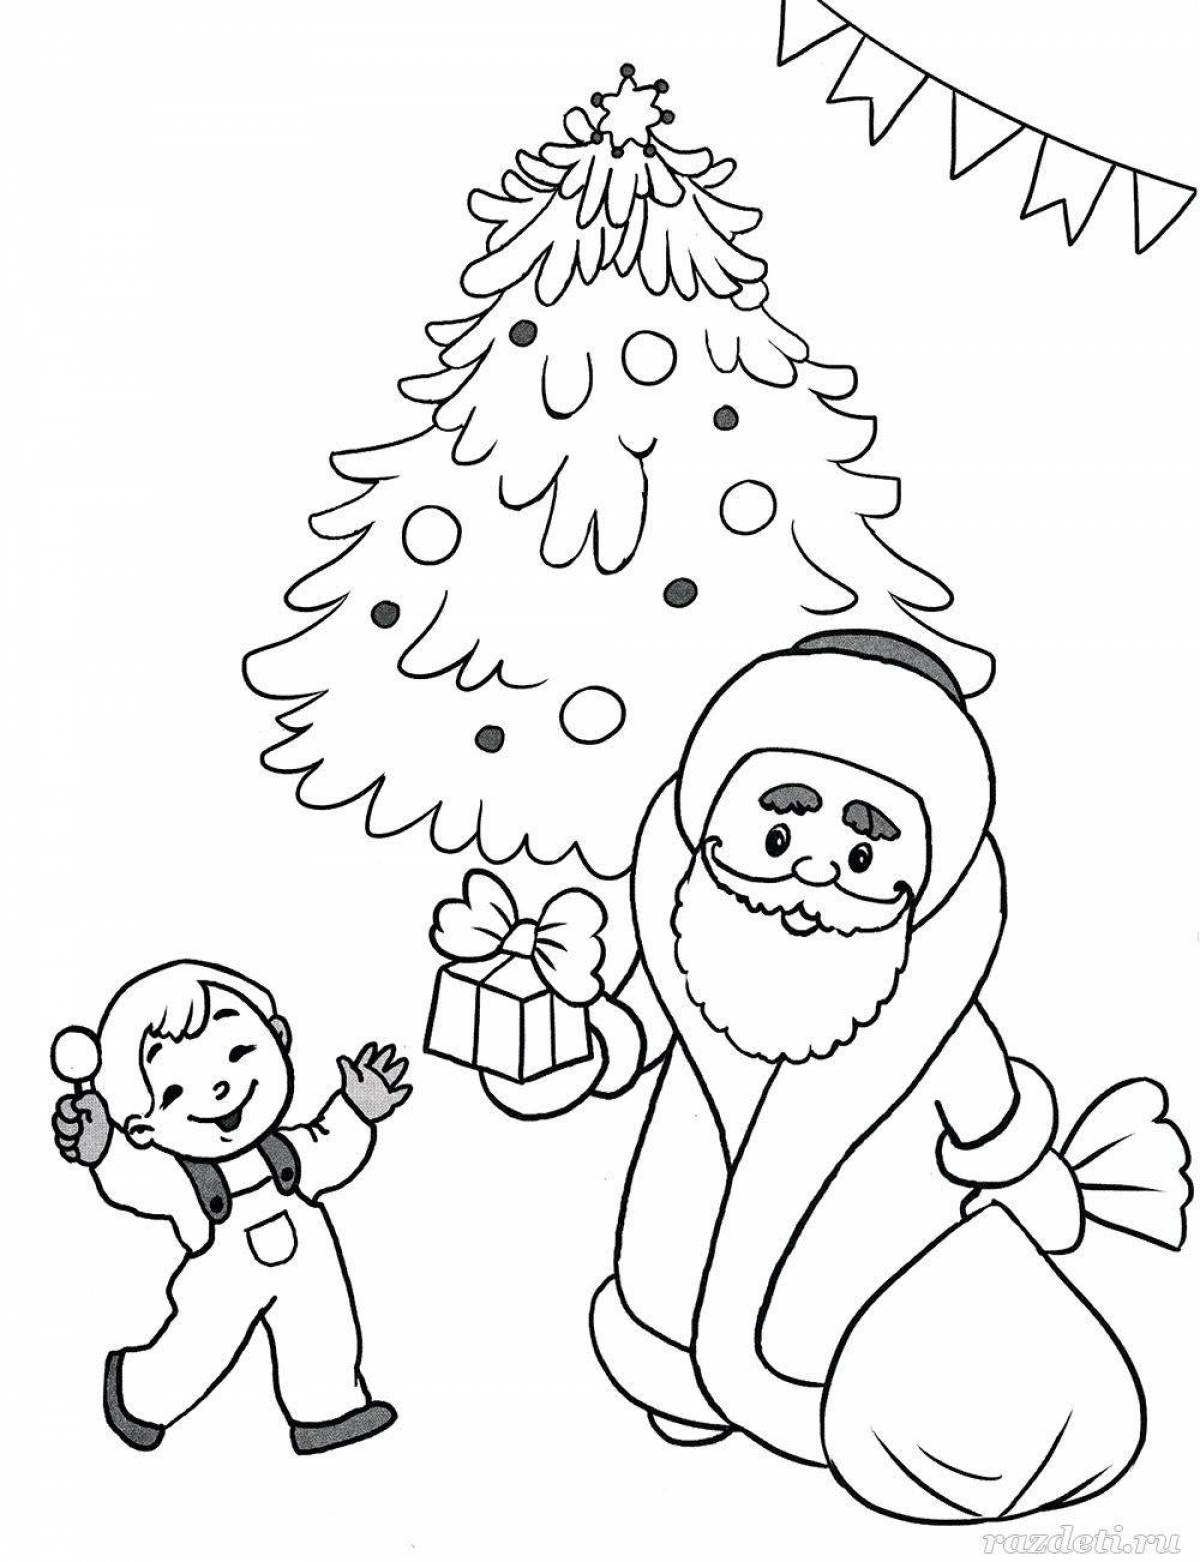 Glitter Christmas tree coloring page